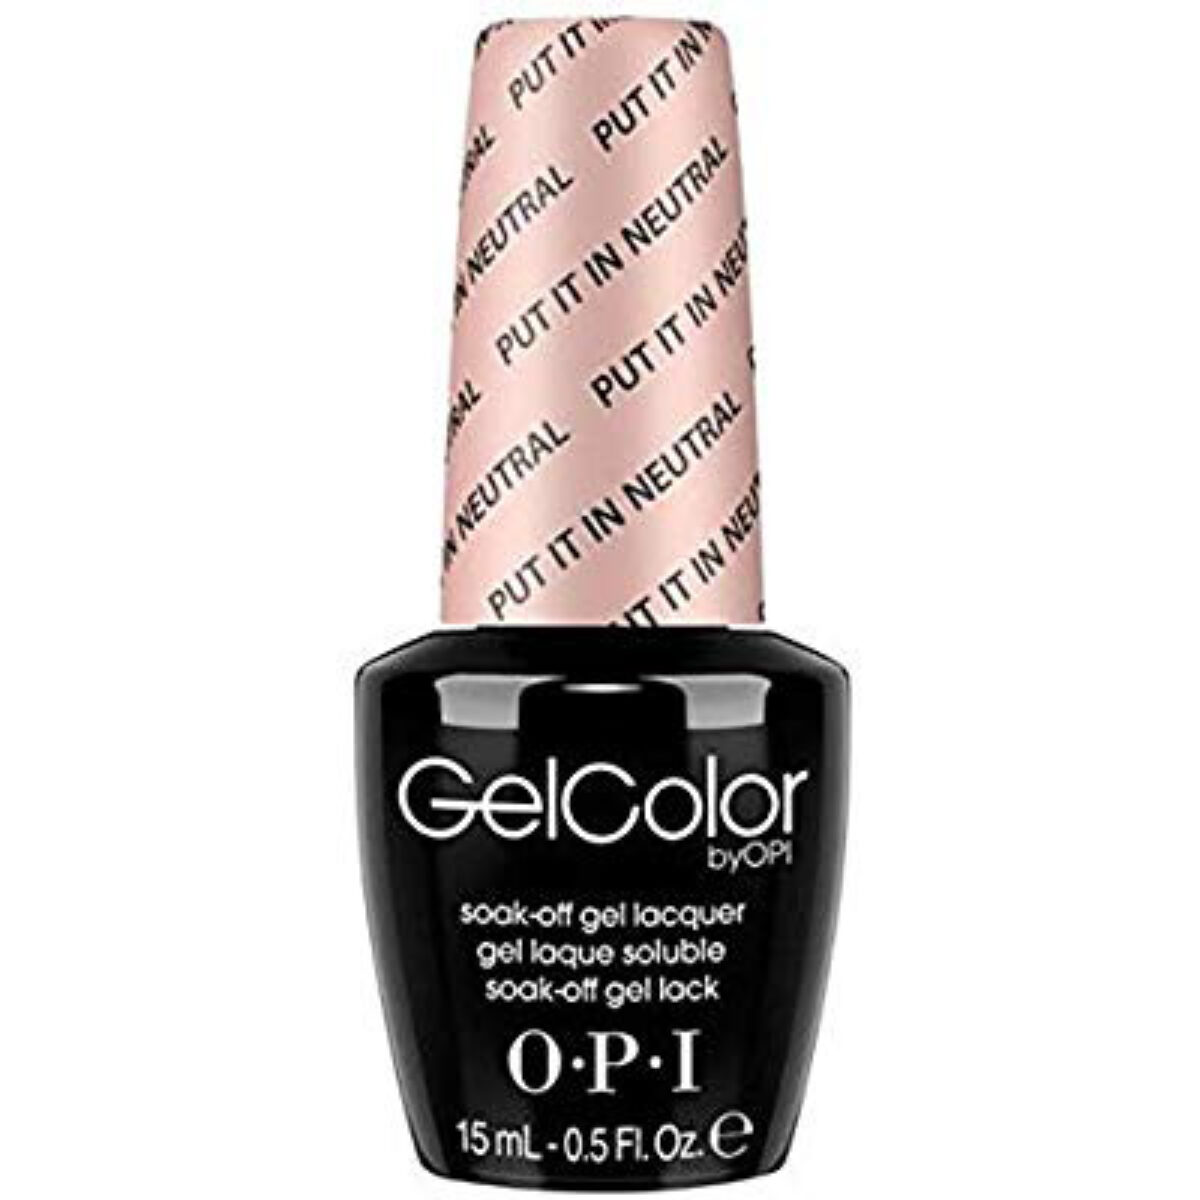 OPI Gel Color - Put it in Neutral T65 - Hollywood Nails Supply UK